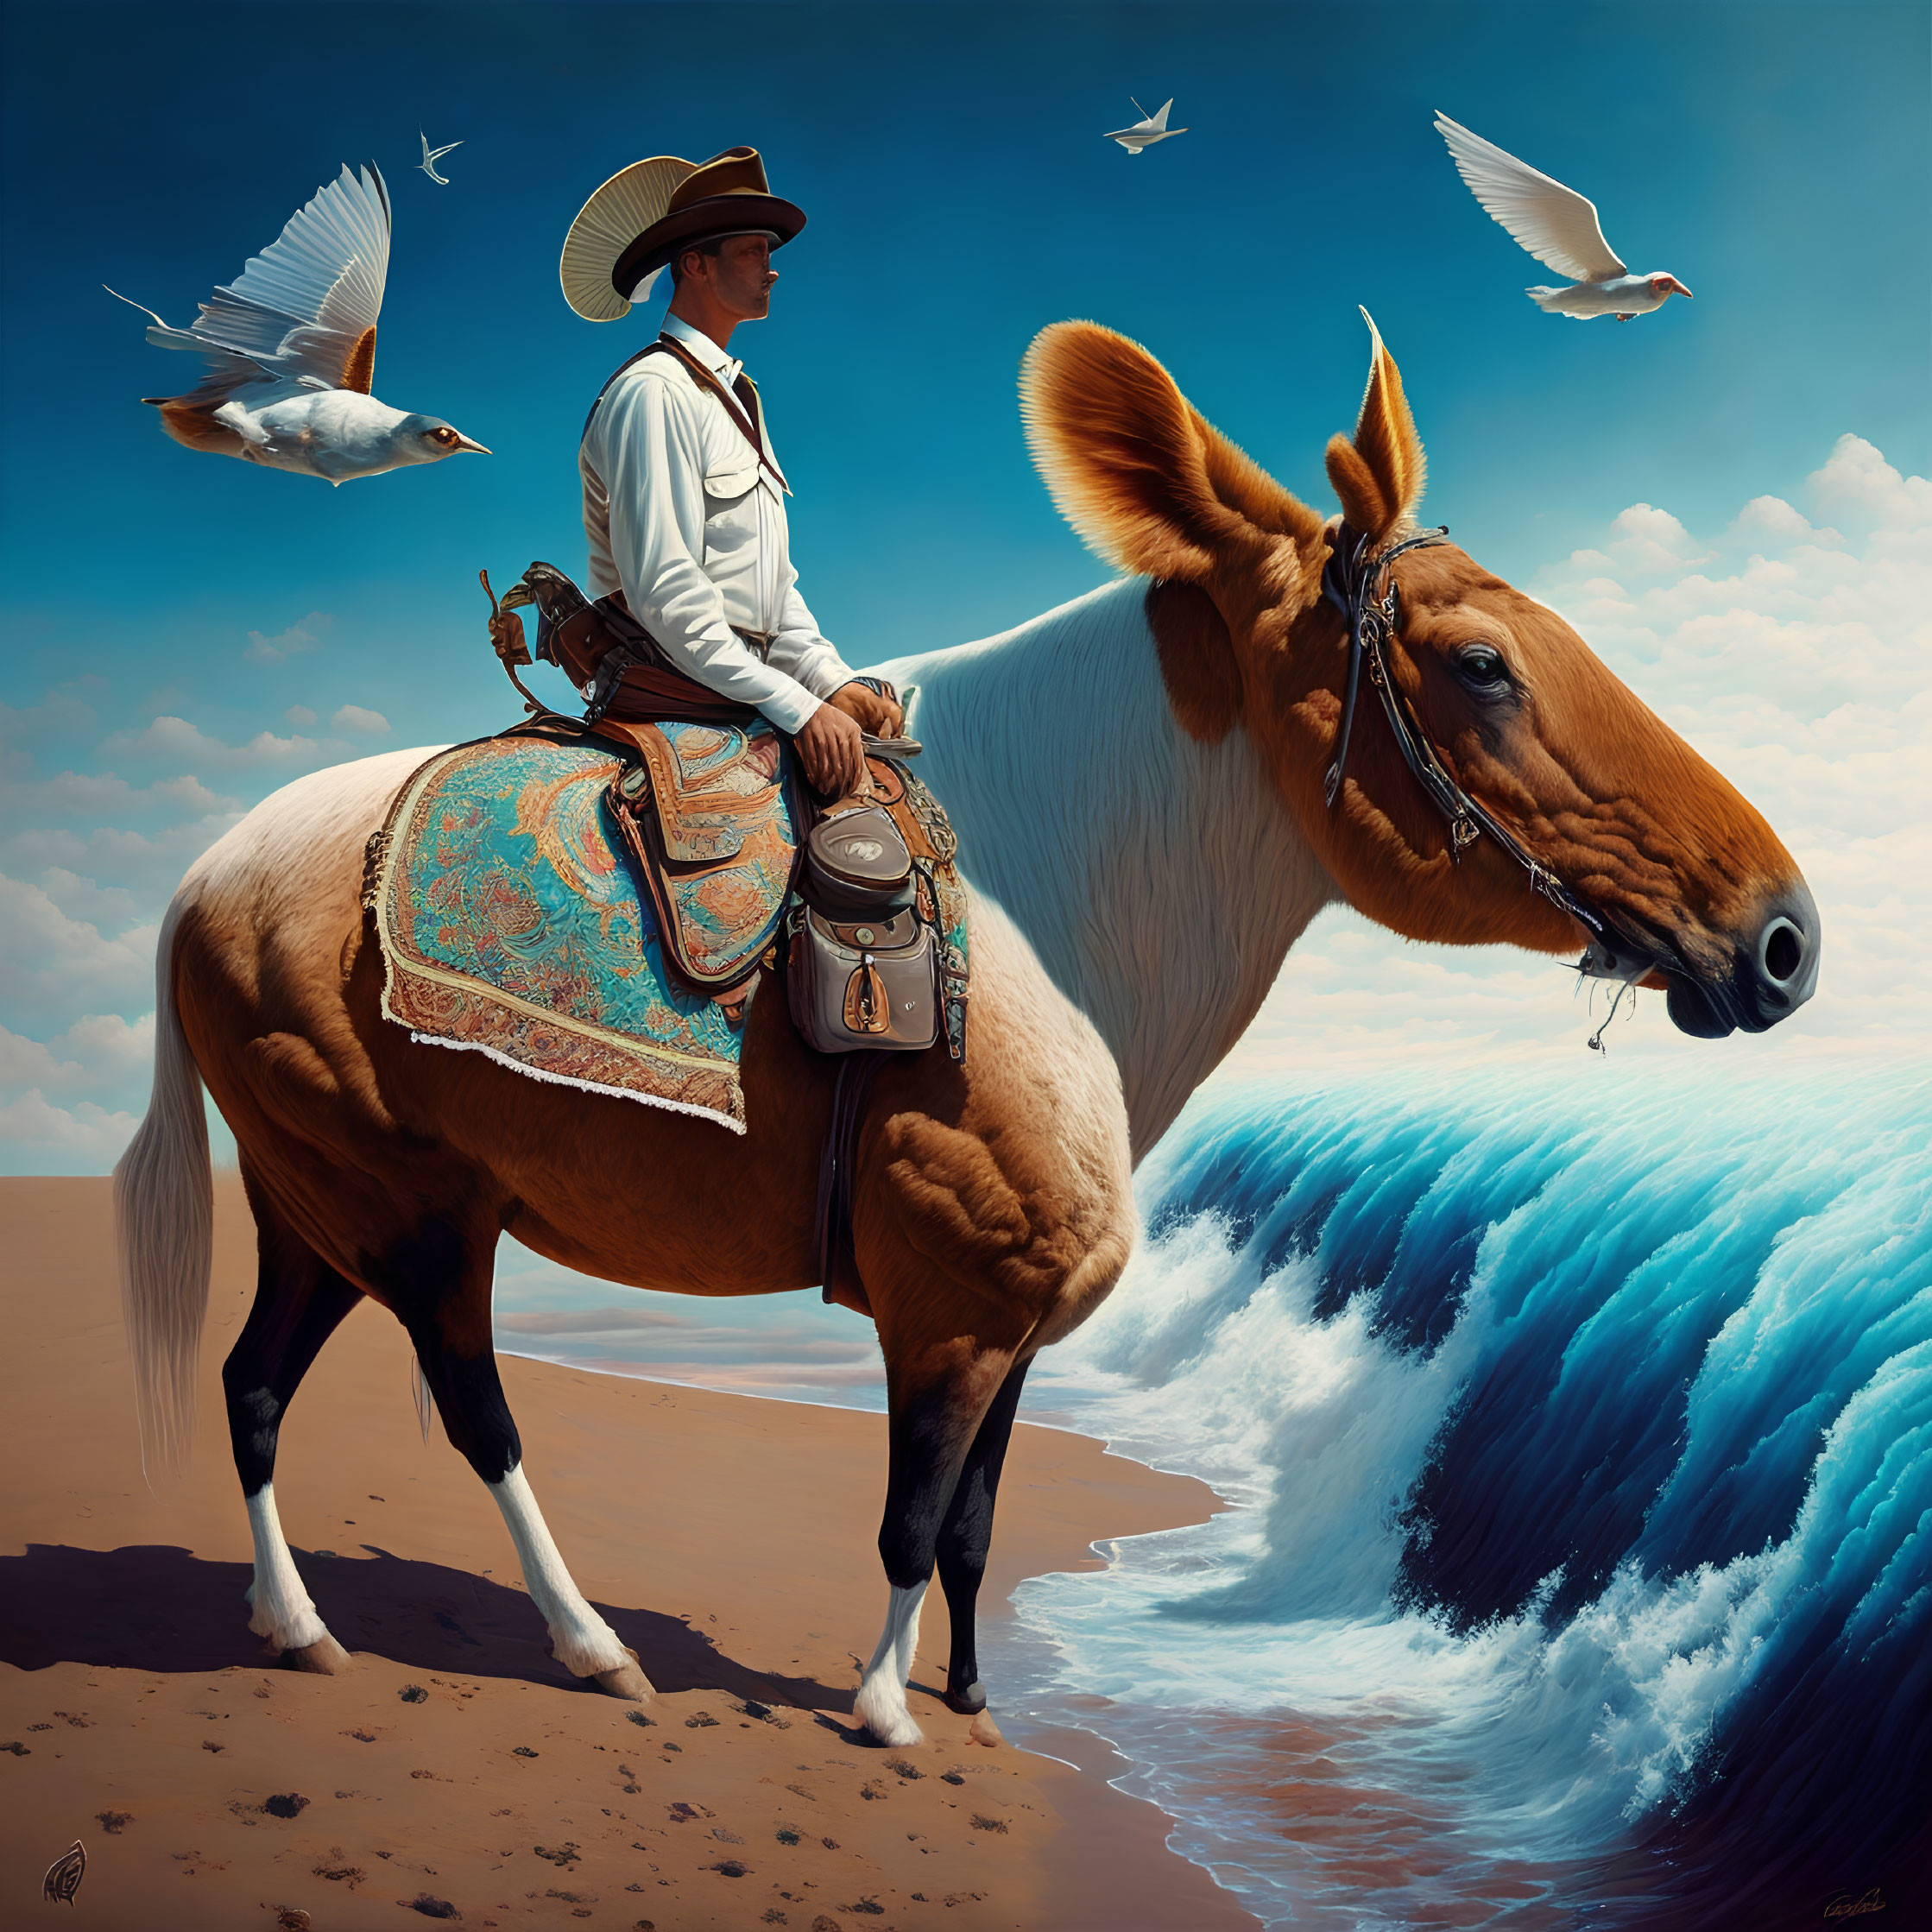 Cowboy hat woman on palomino horse at surreal beach with seagulls